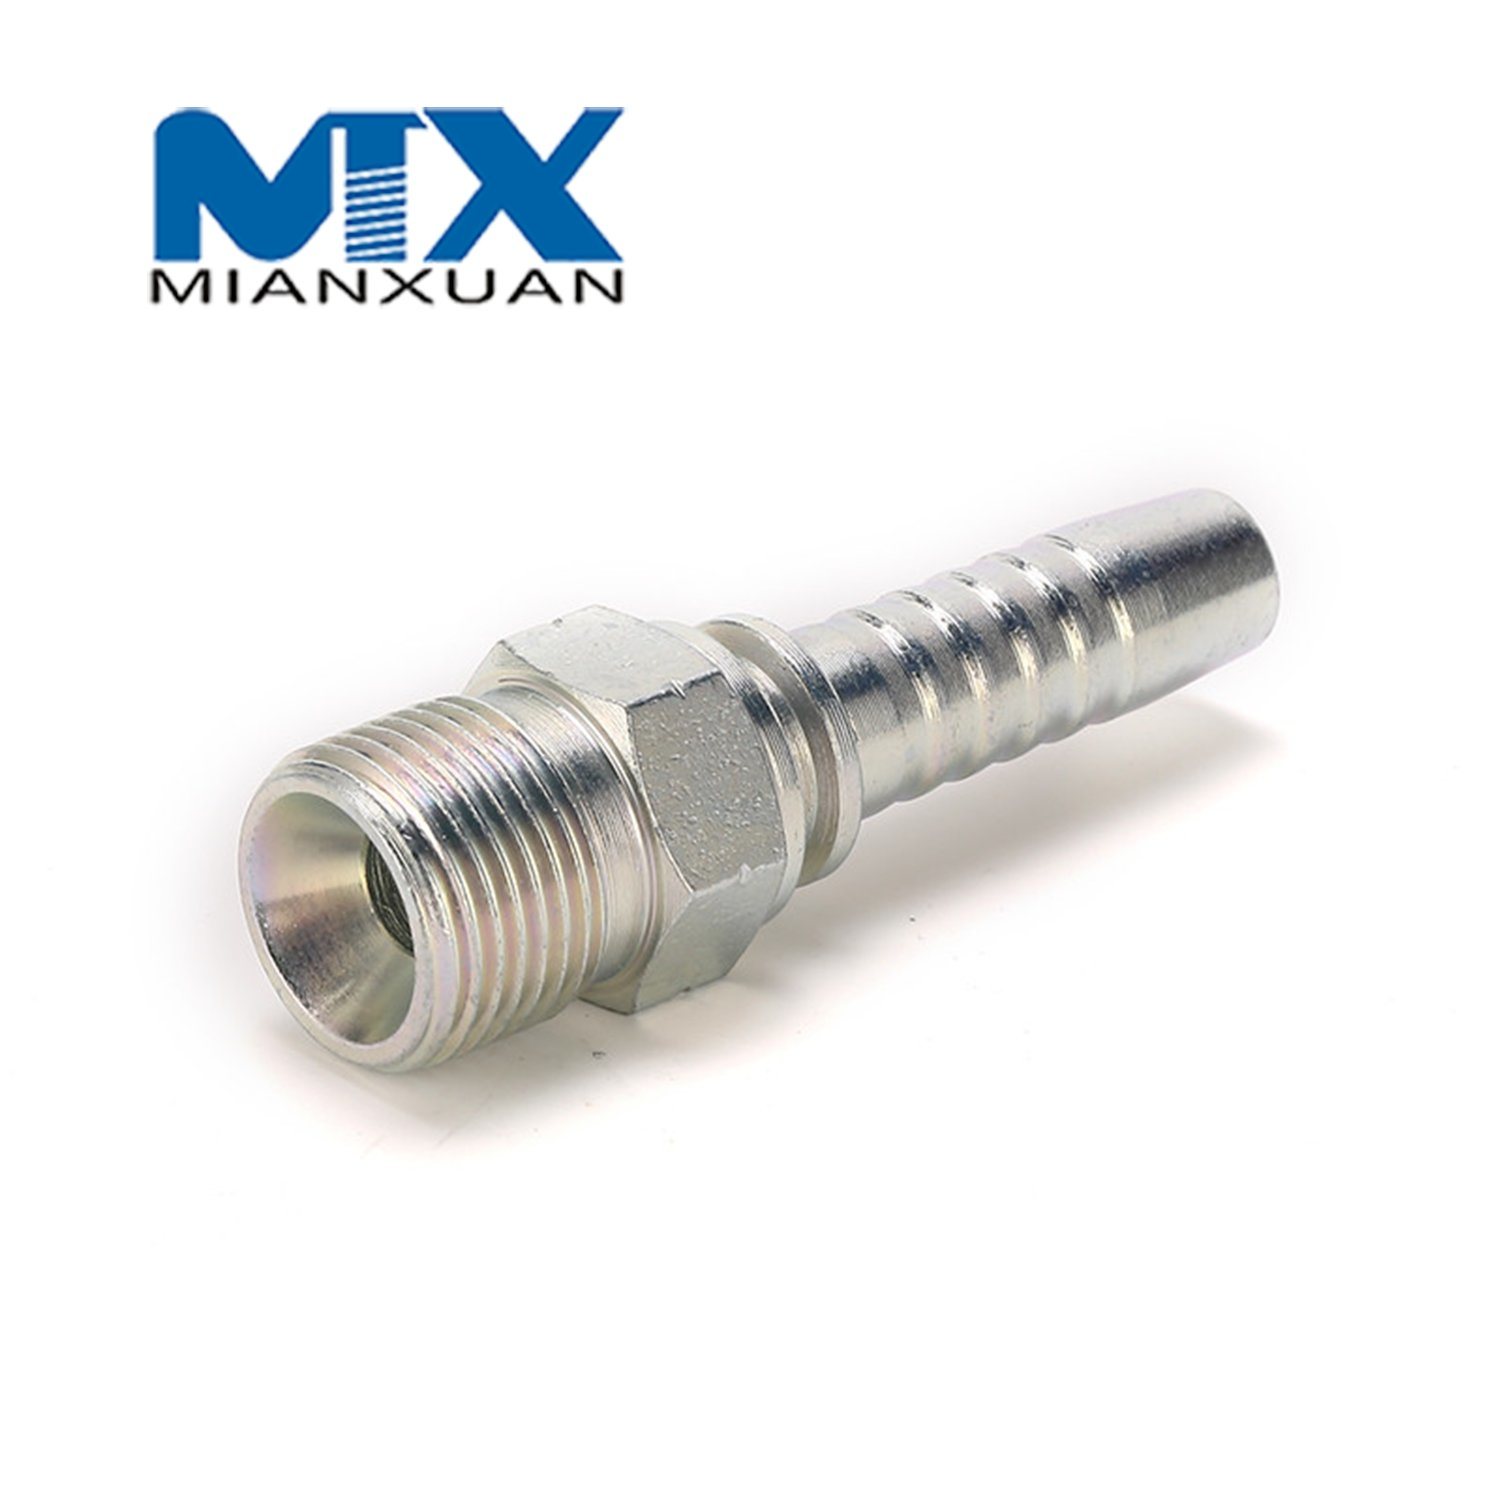 Stainless Steel Hydraulic Metric 90degree Cone Seat Pipe Connector Coupling Adapter Fittings